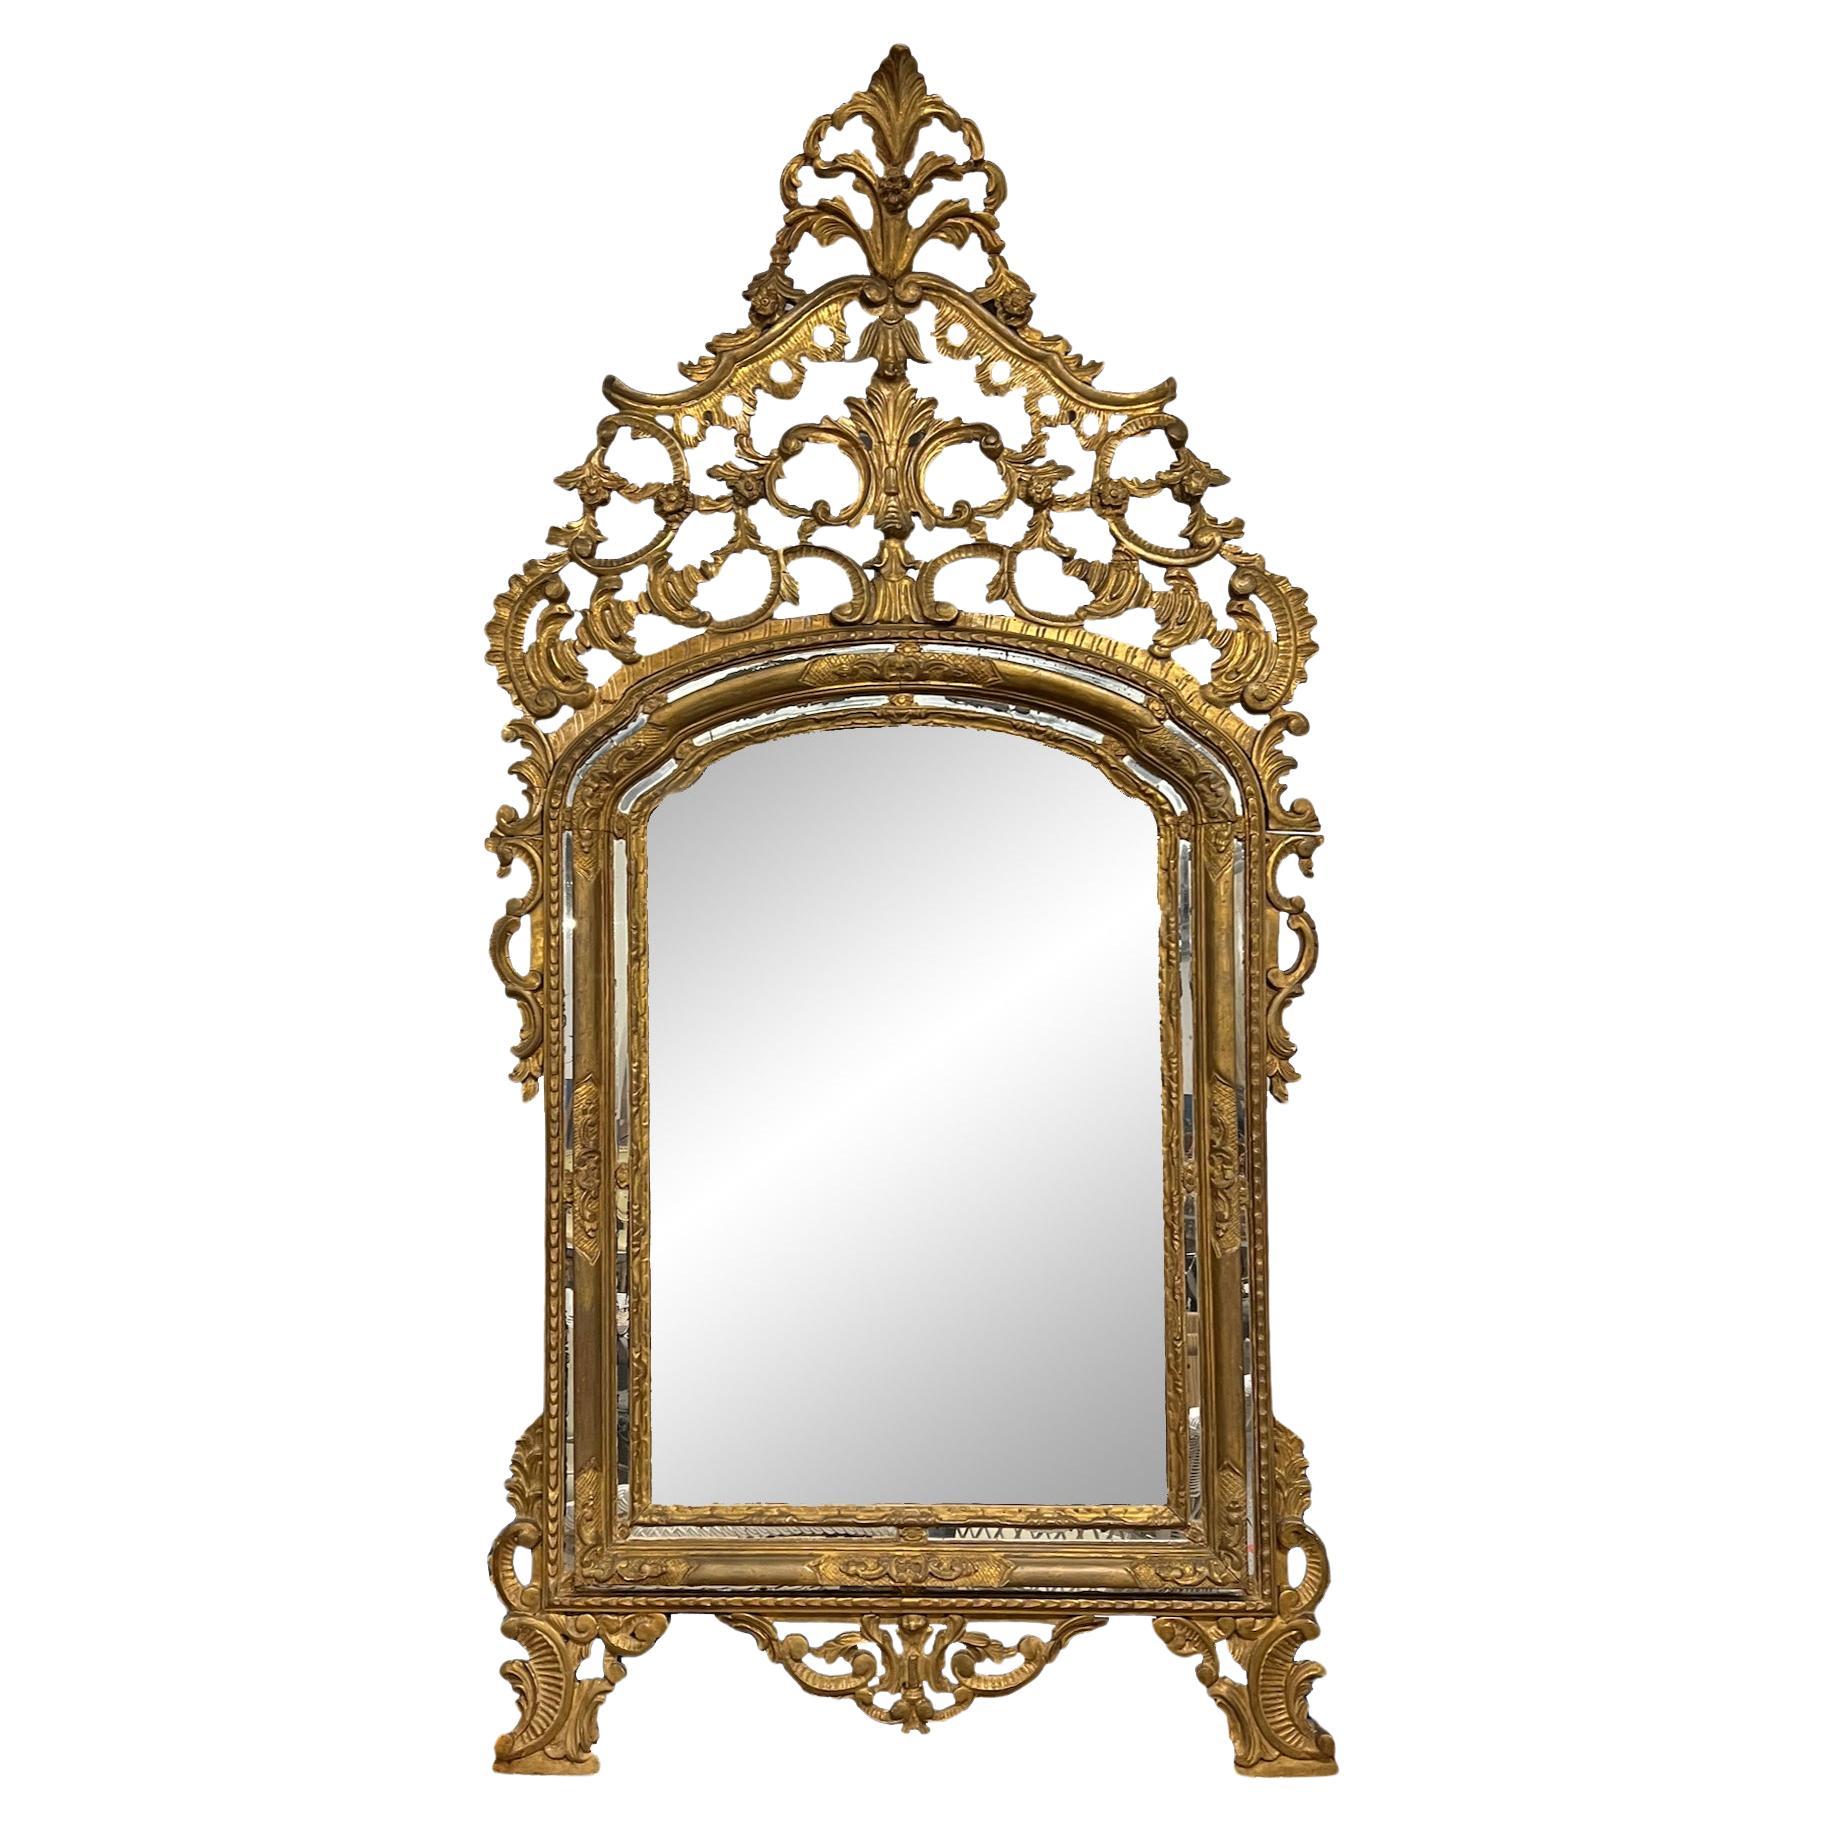 Exquisitely Carved Rococo French Gilt Mirror – 18th Century For Sale